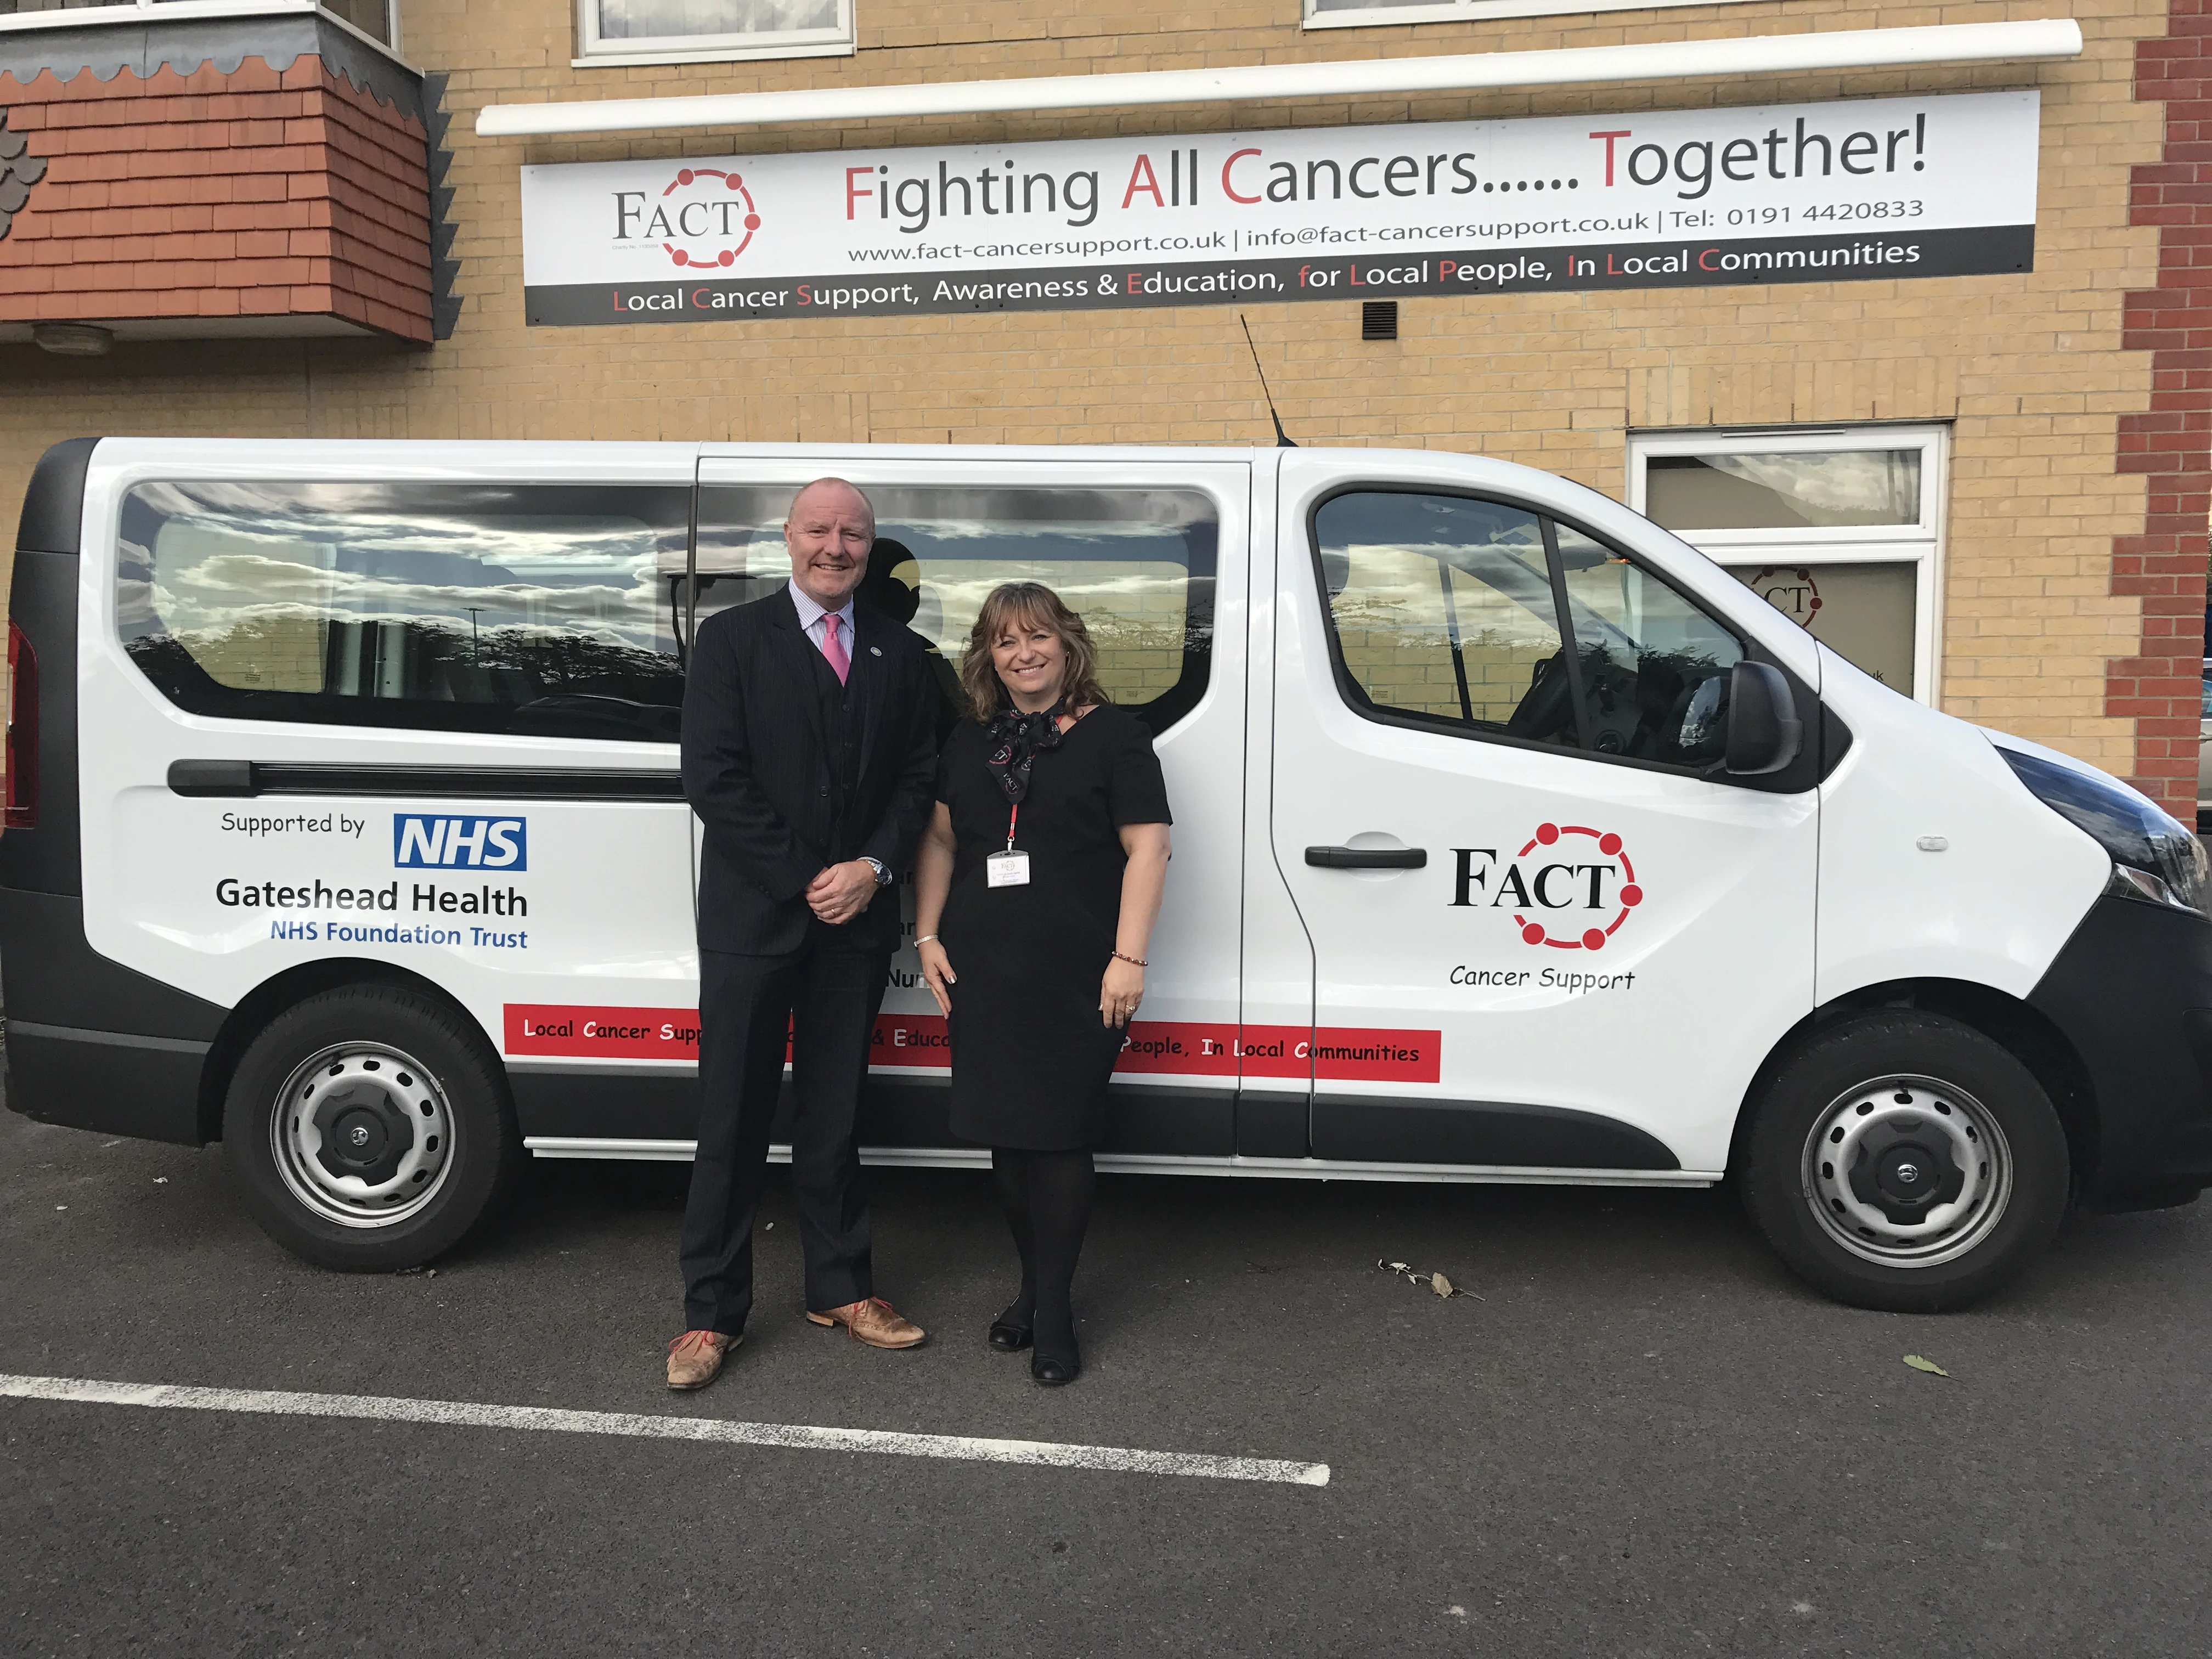 (Left) Ian Renwick, chief executive of Gateshead Health NHS Foundation Trust, and (right) Joanne Smith, founder and chief executive of FACT